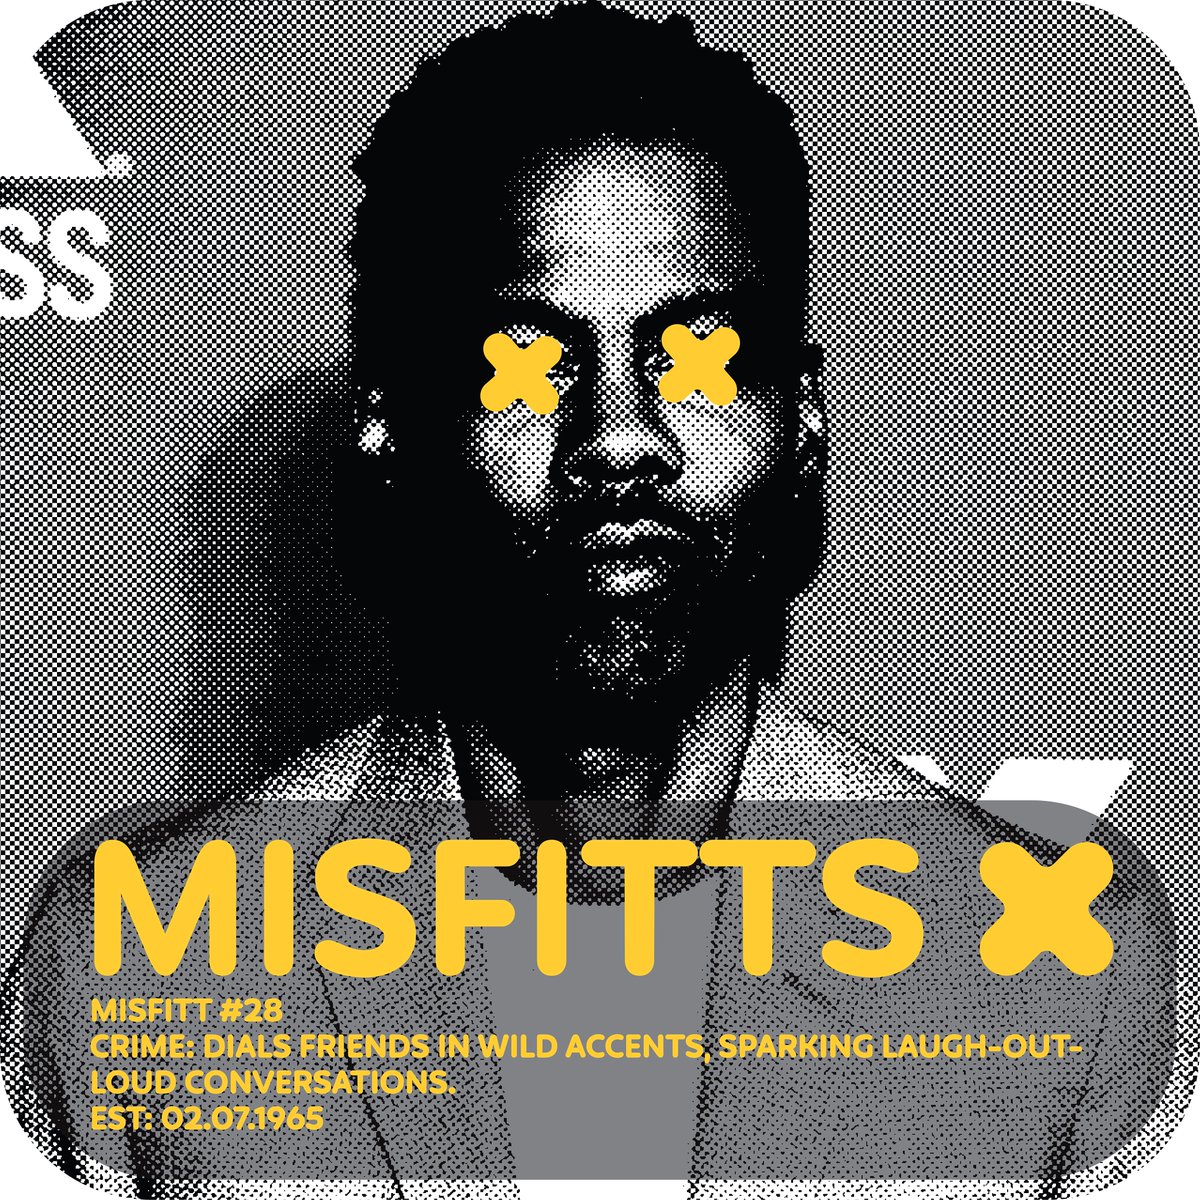 ⚠️ ⛔ Misfitt of the Day! ⛔ ⚠️

What is a Misfitt❓ 

Misfit humor maestro, a conductor of comedic orchestras, painting the pixelated airwaves with notes of laughter. 😁 

#nft #nftcommunity #meme #chrisrock #willsmith #kevinhart